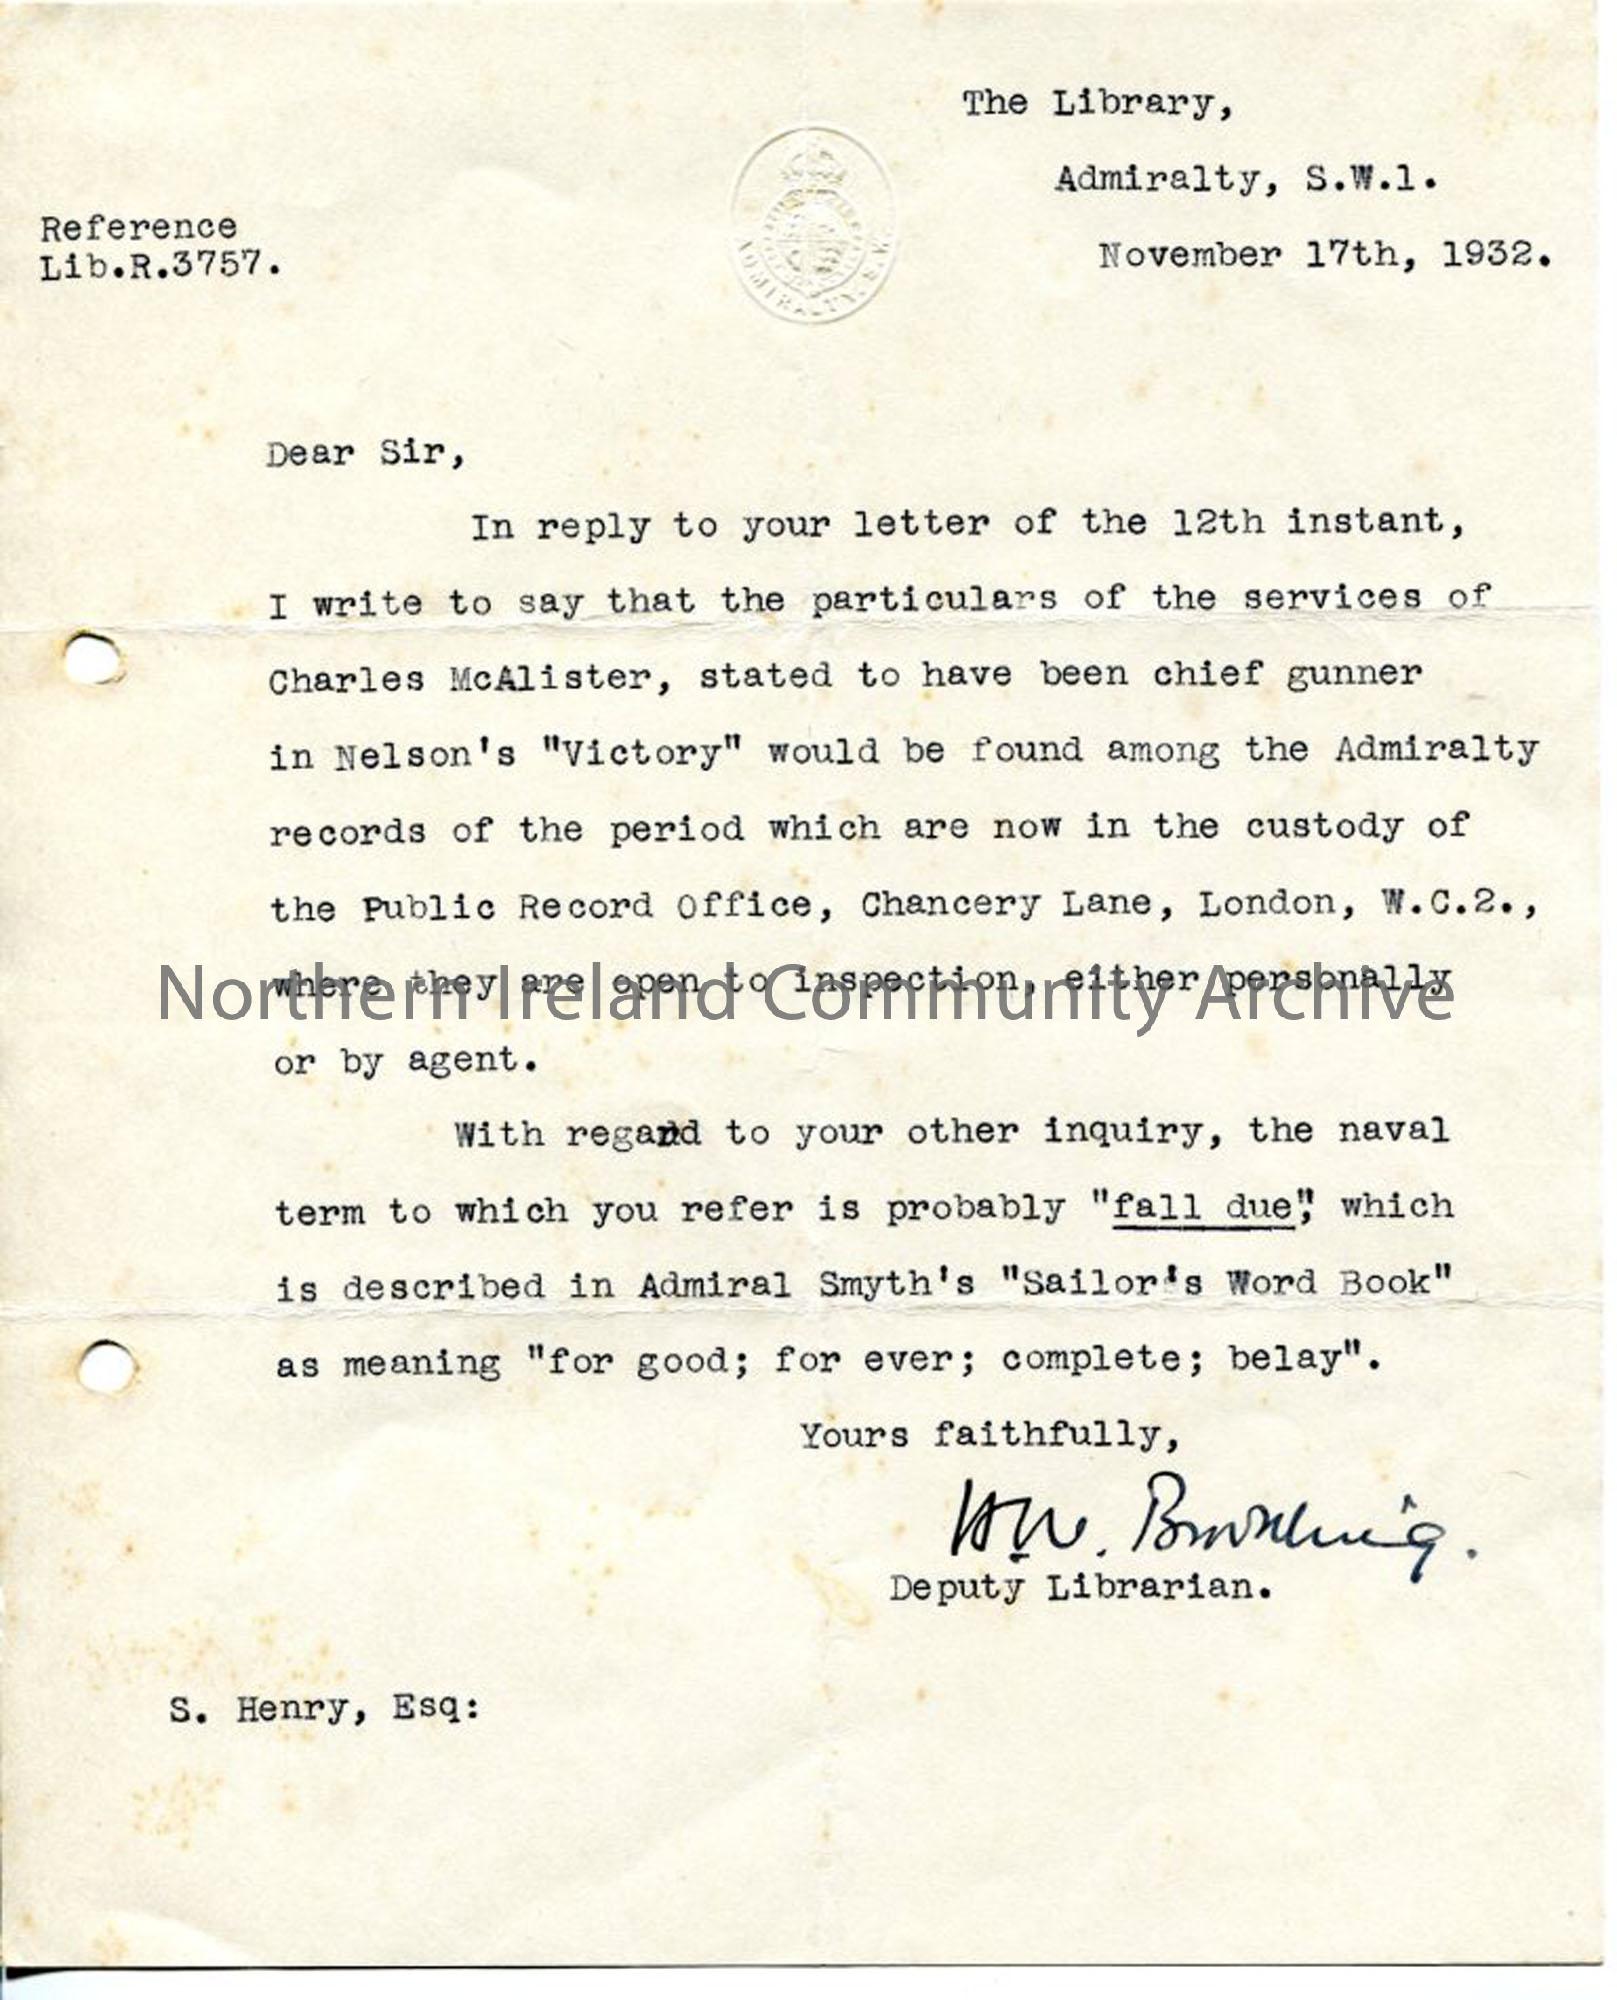 Letter from H. W. Browning, 17.11.1932